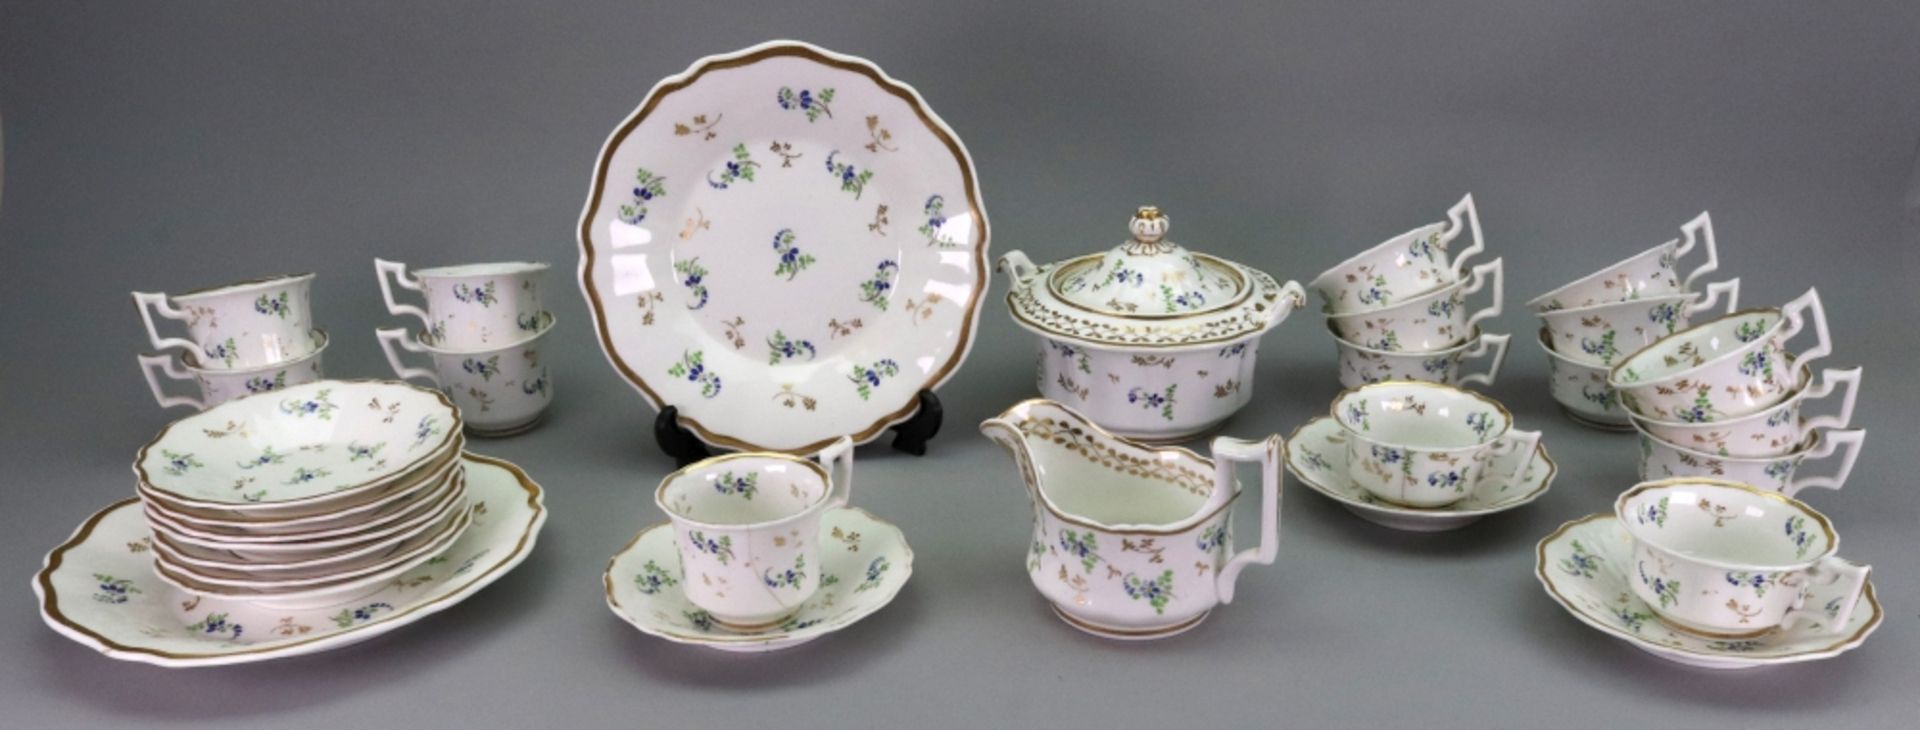 A Ridgway porcelain part tea and coffee service, 1820's, enamelled and gilt with flower sprigs,